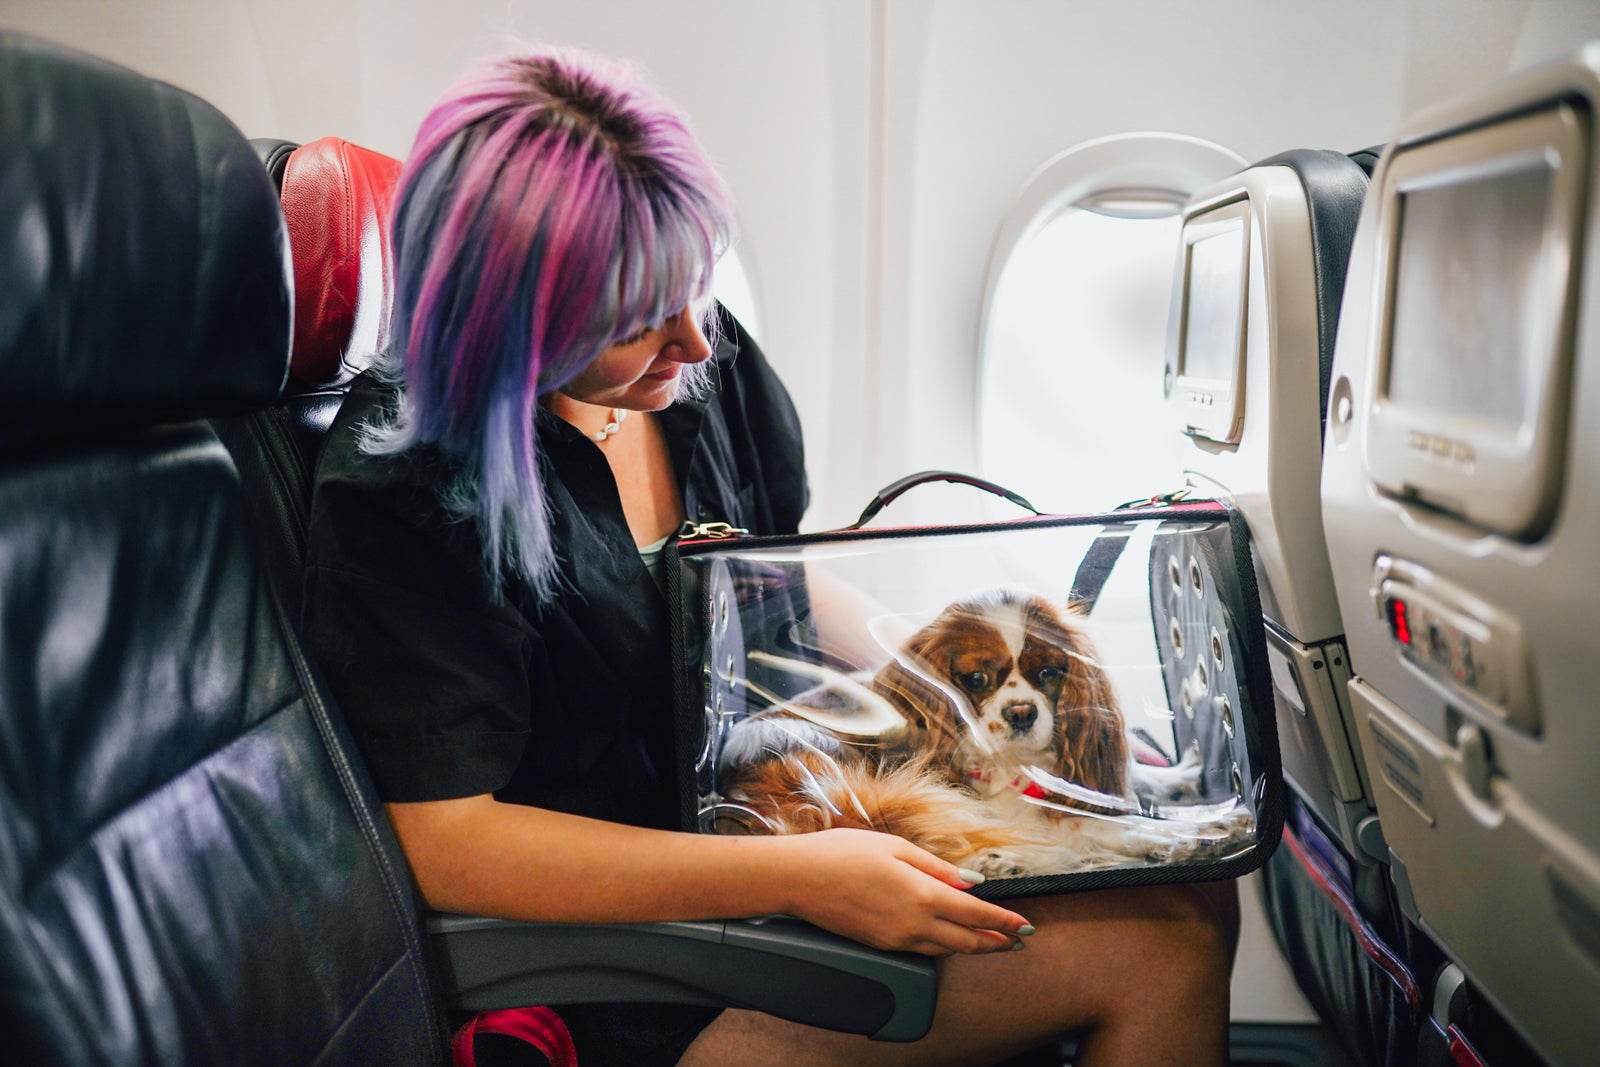 united airlines seat for dog